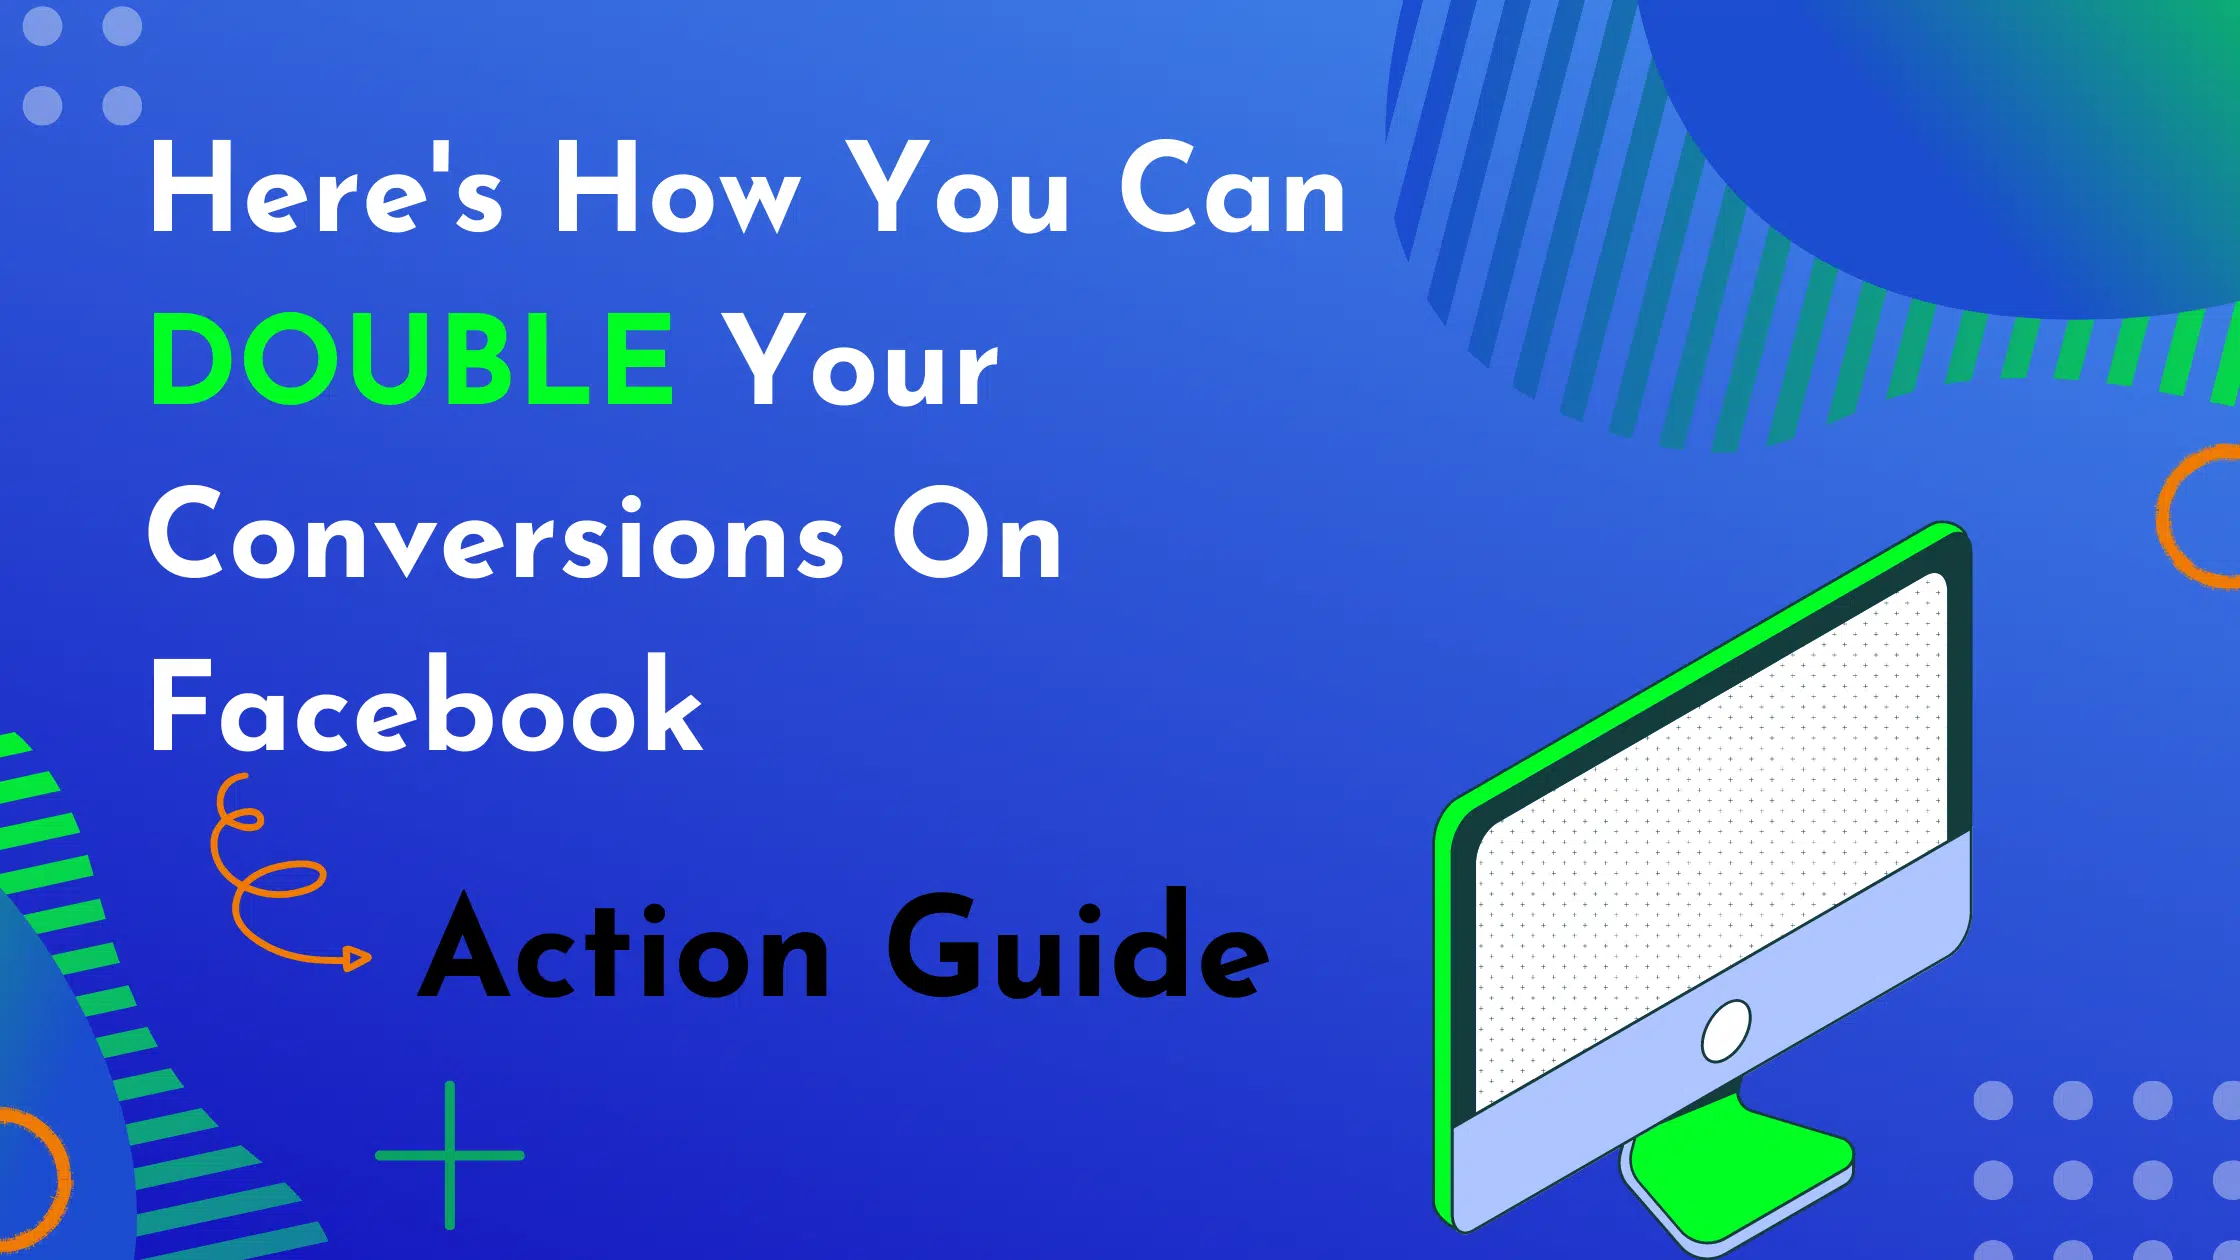 Here's How You Can Double Your Conversions On Facebook